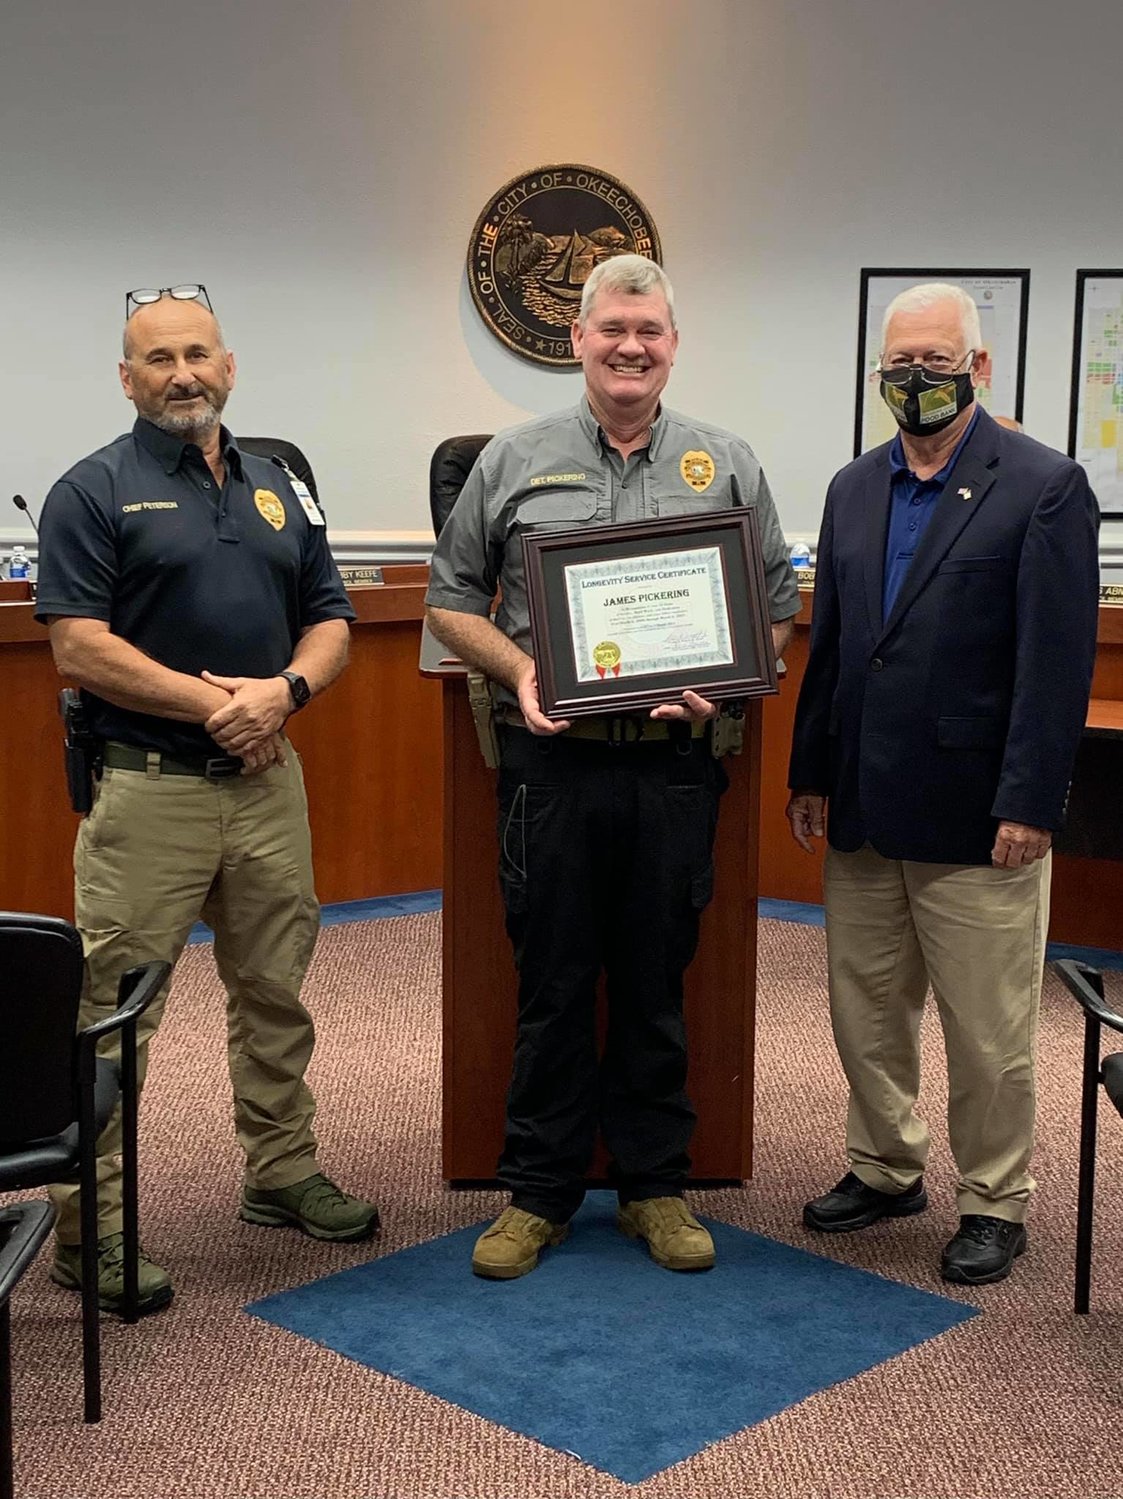 Mayor Watford (right) and Police Chief Peterson (left) present a 15-Year Longevity Service Award to Detective James Pickering at the March 2, 2021 City Council meeting.